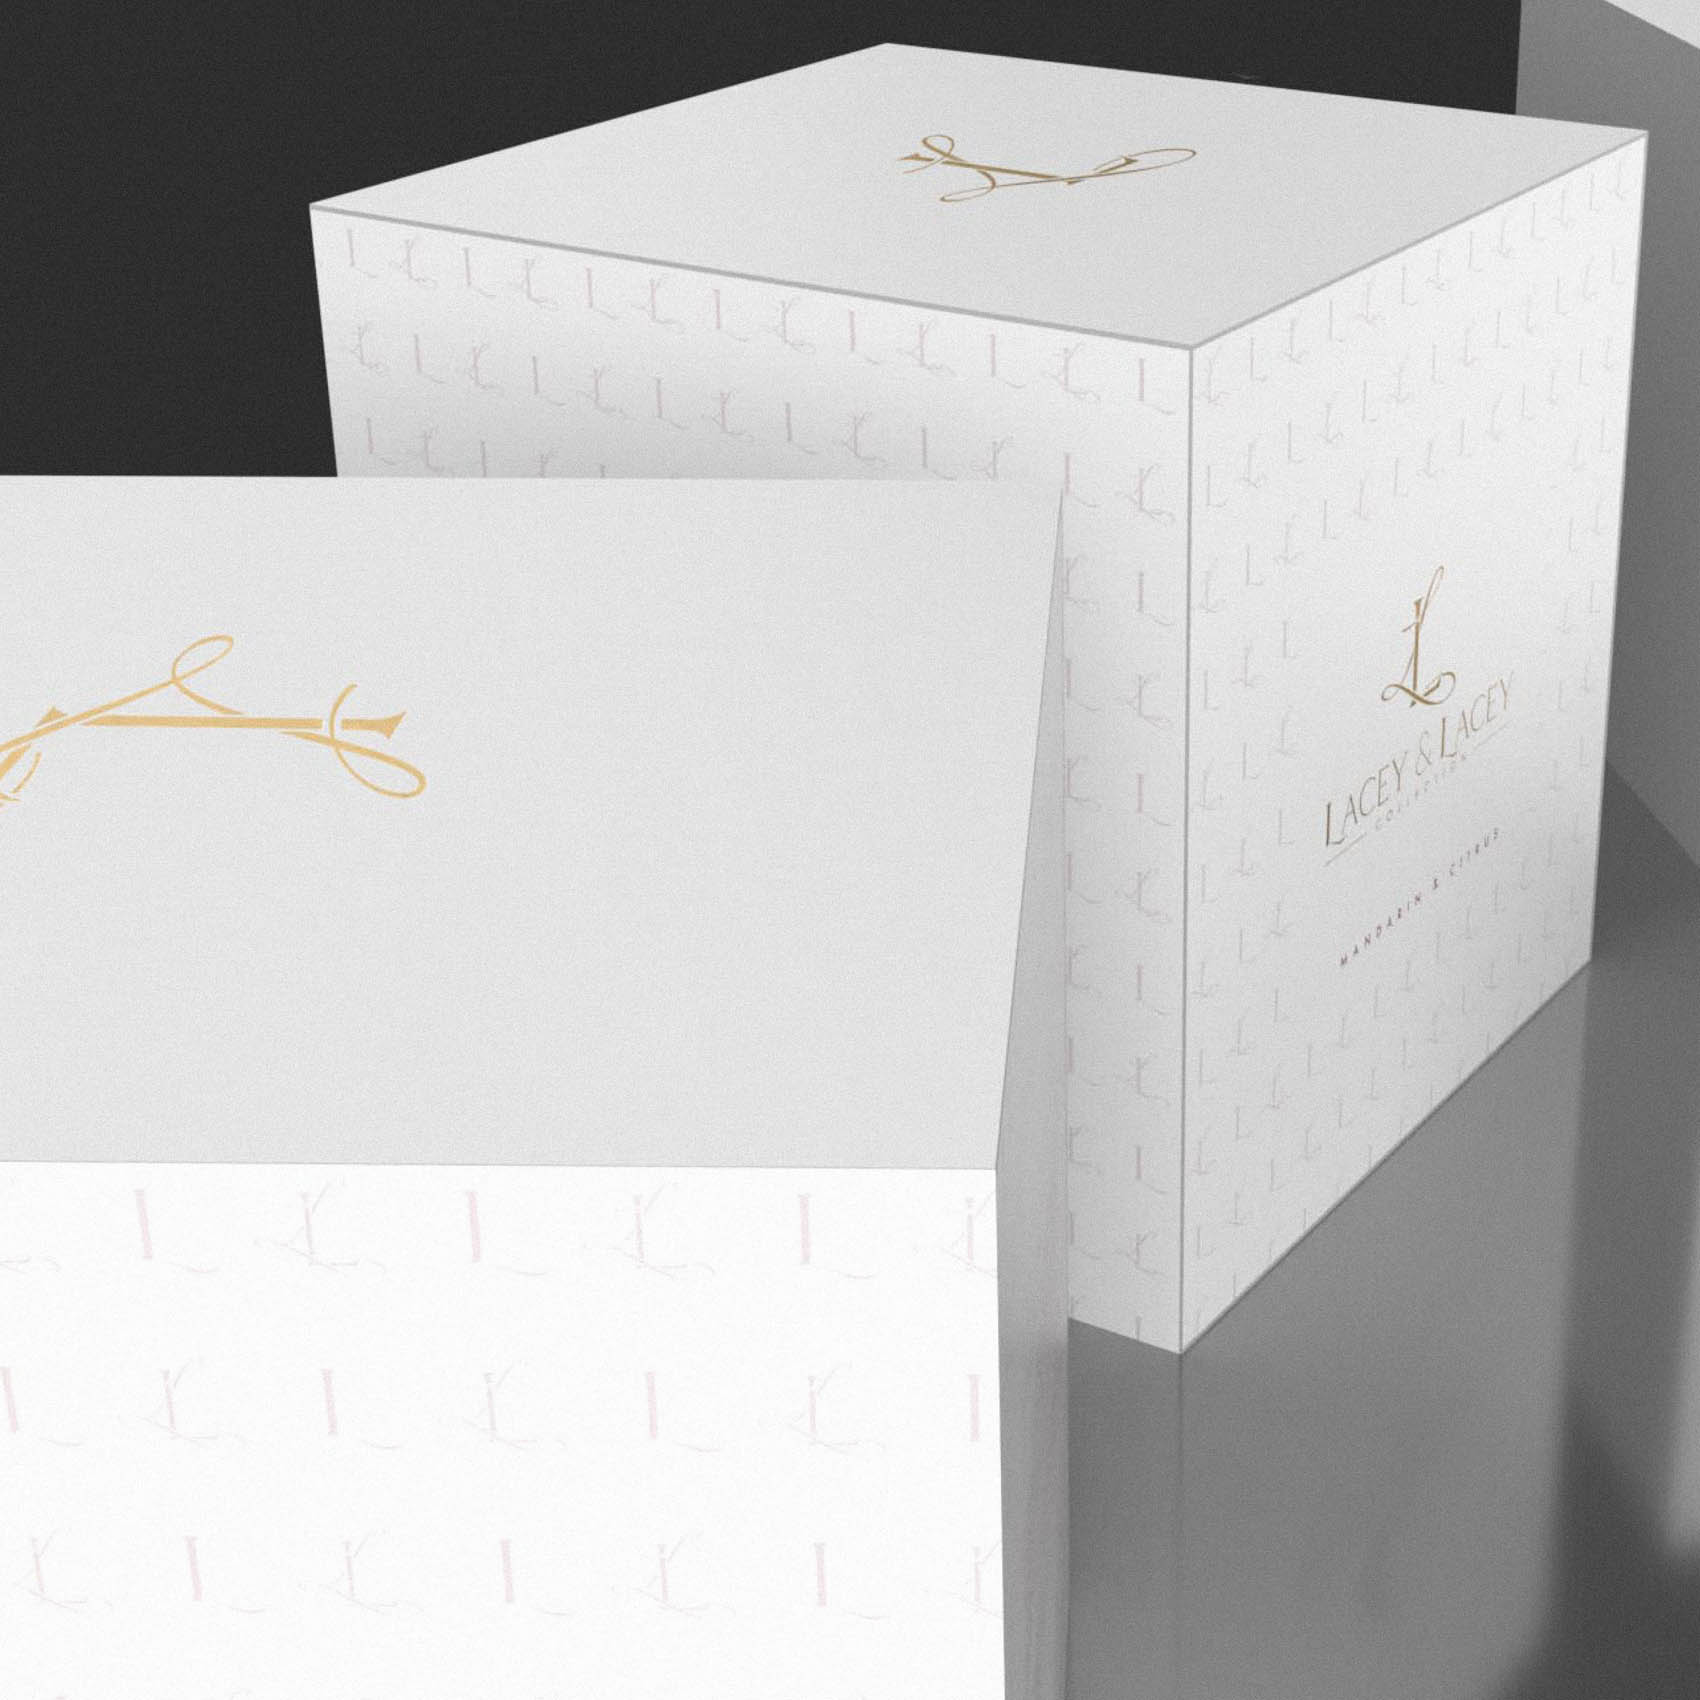 Lacey & Lacey - Luxury Candle Packaging Logo & Brand Identity9